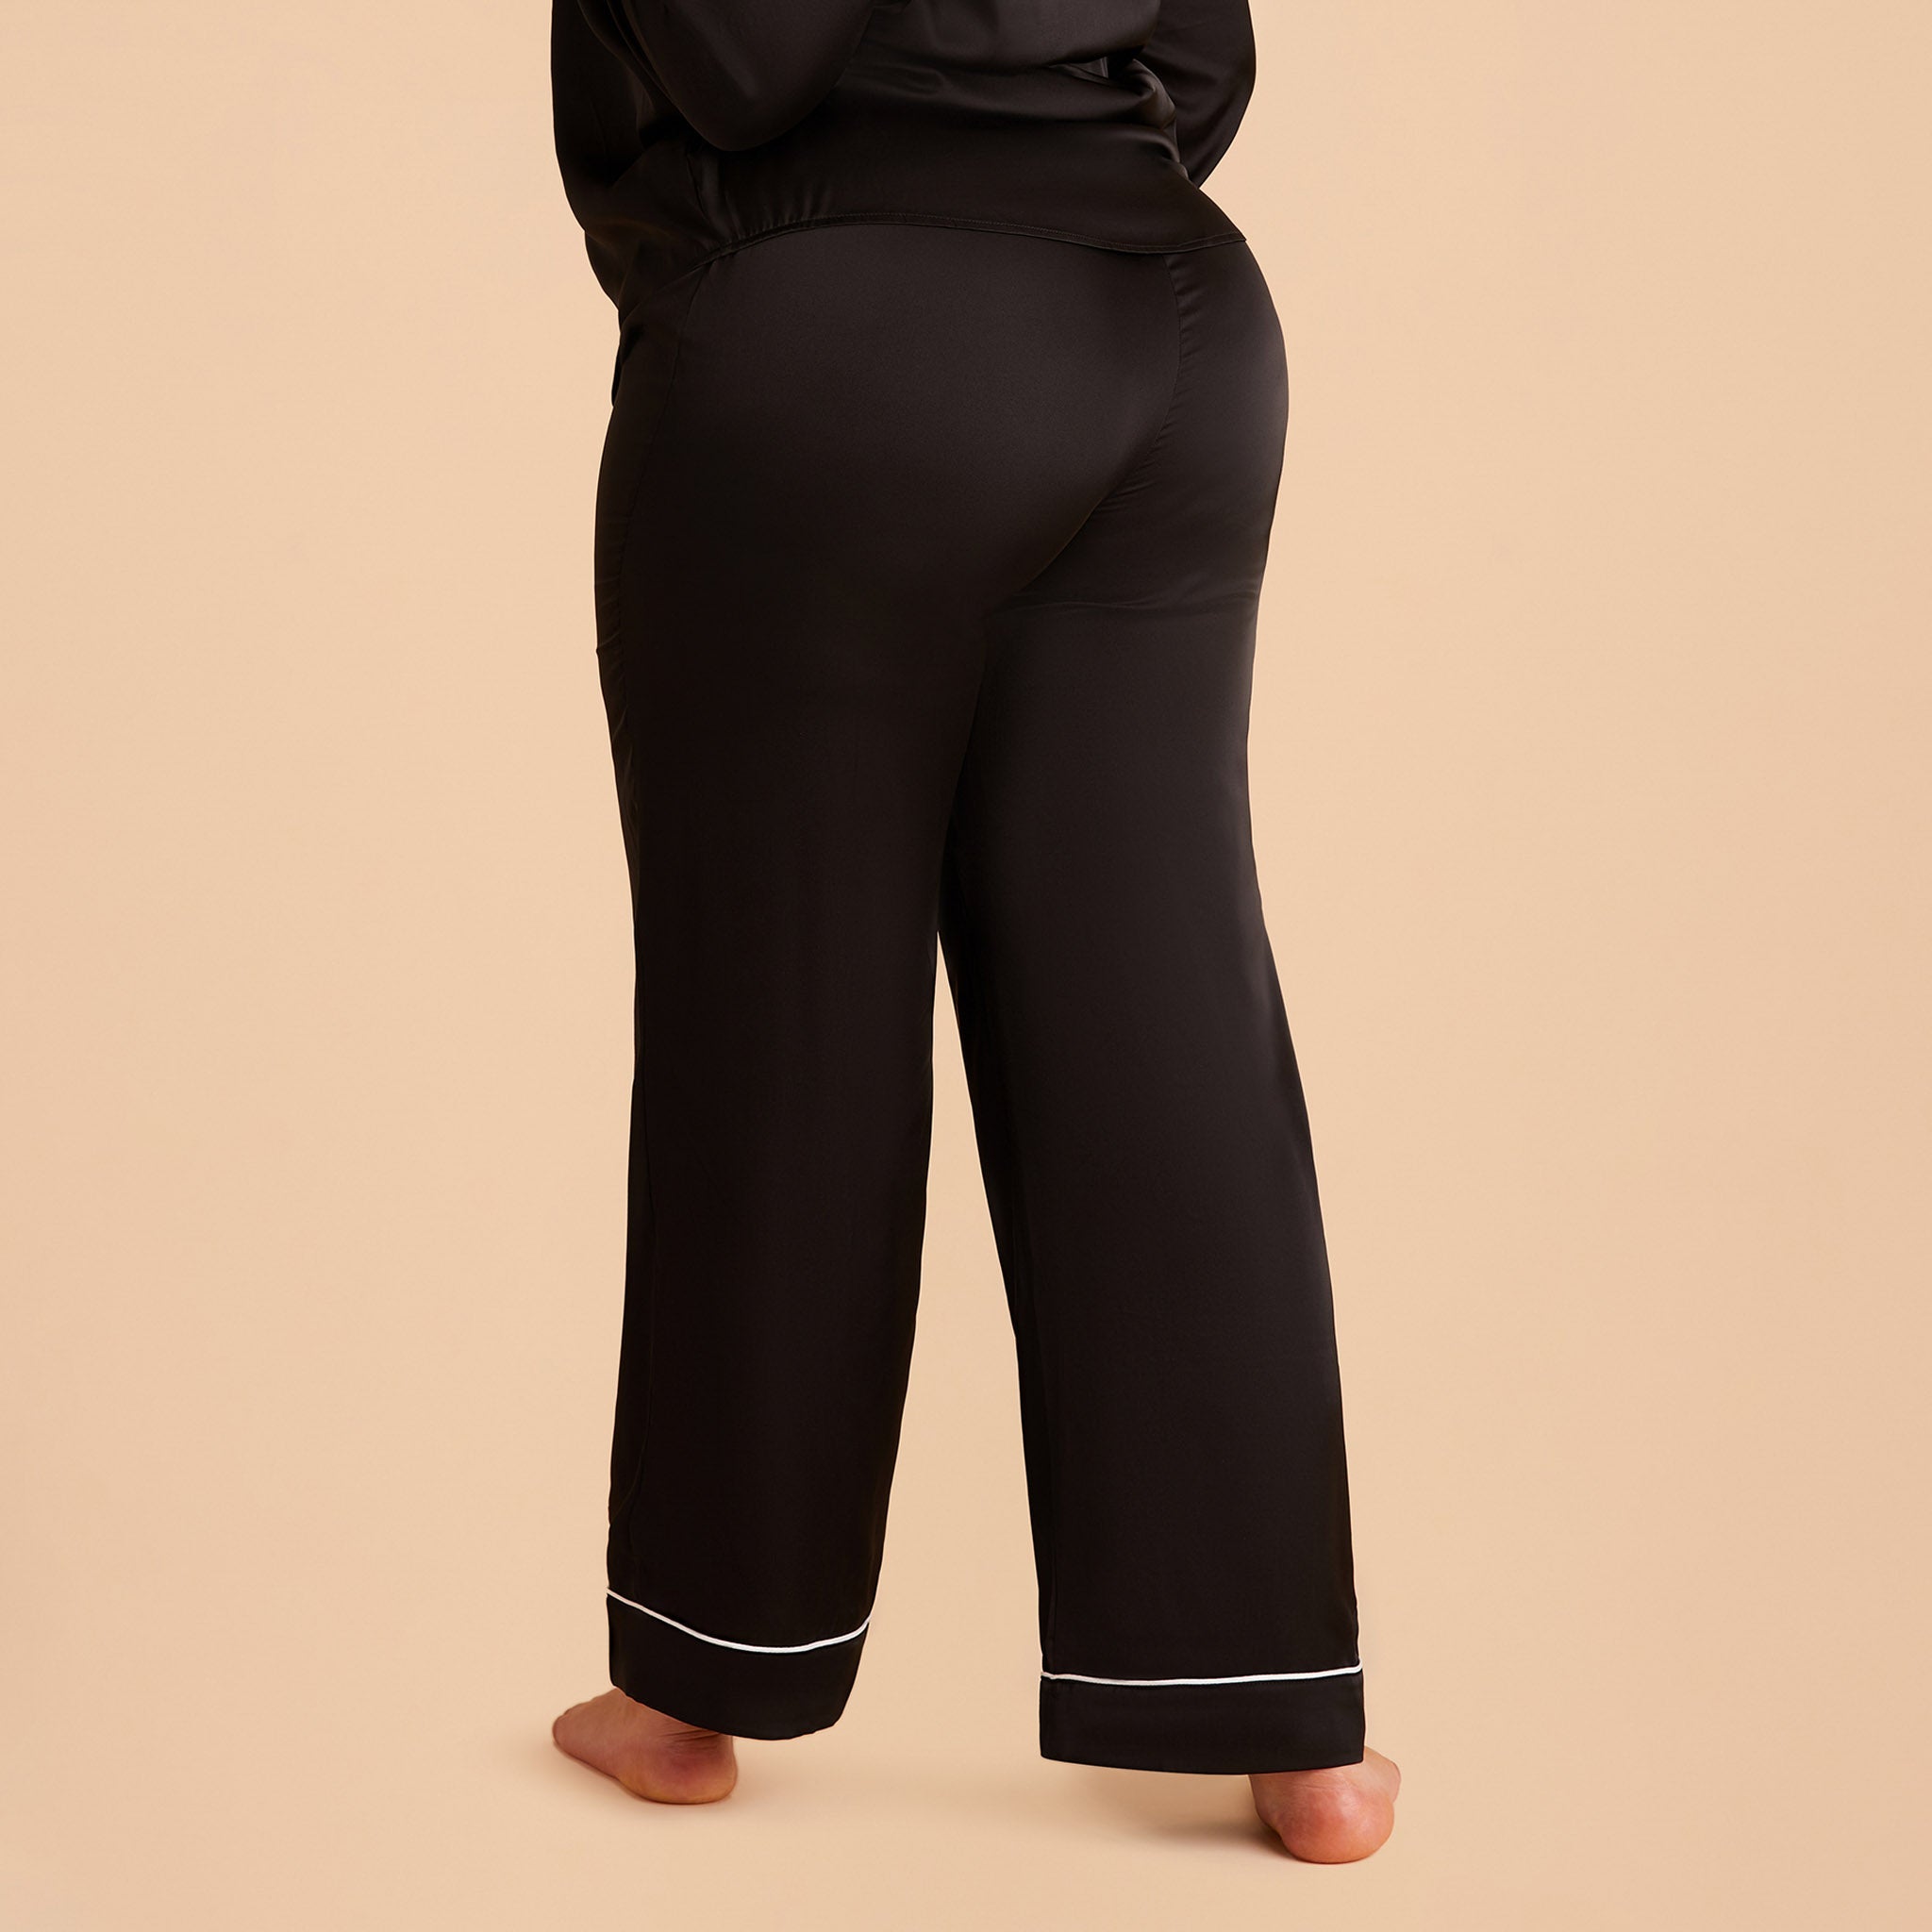 Jonny Plus Size Satin Pants Bridesmaid Pajamas With White Piping in black, back view